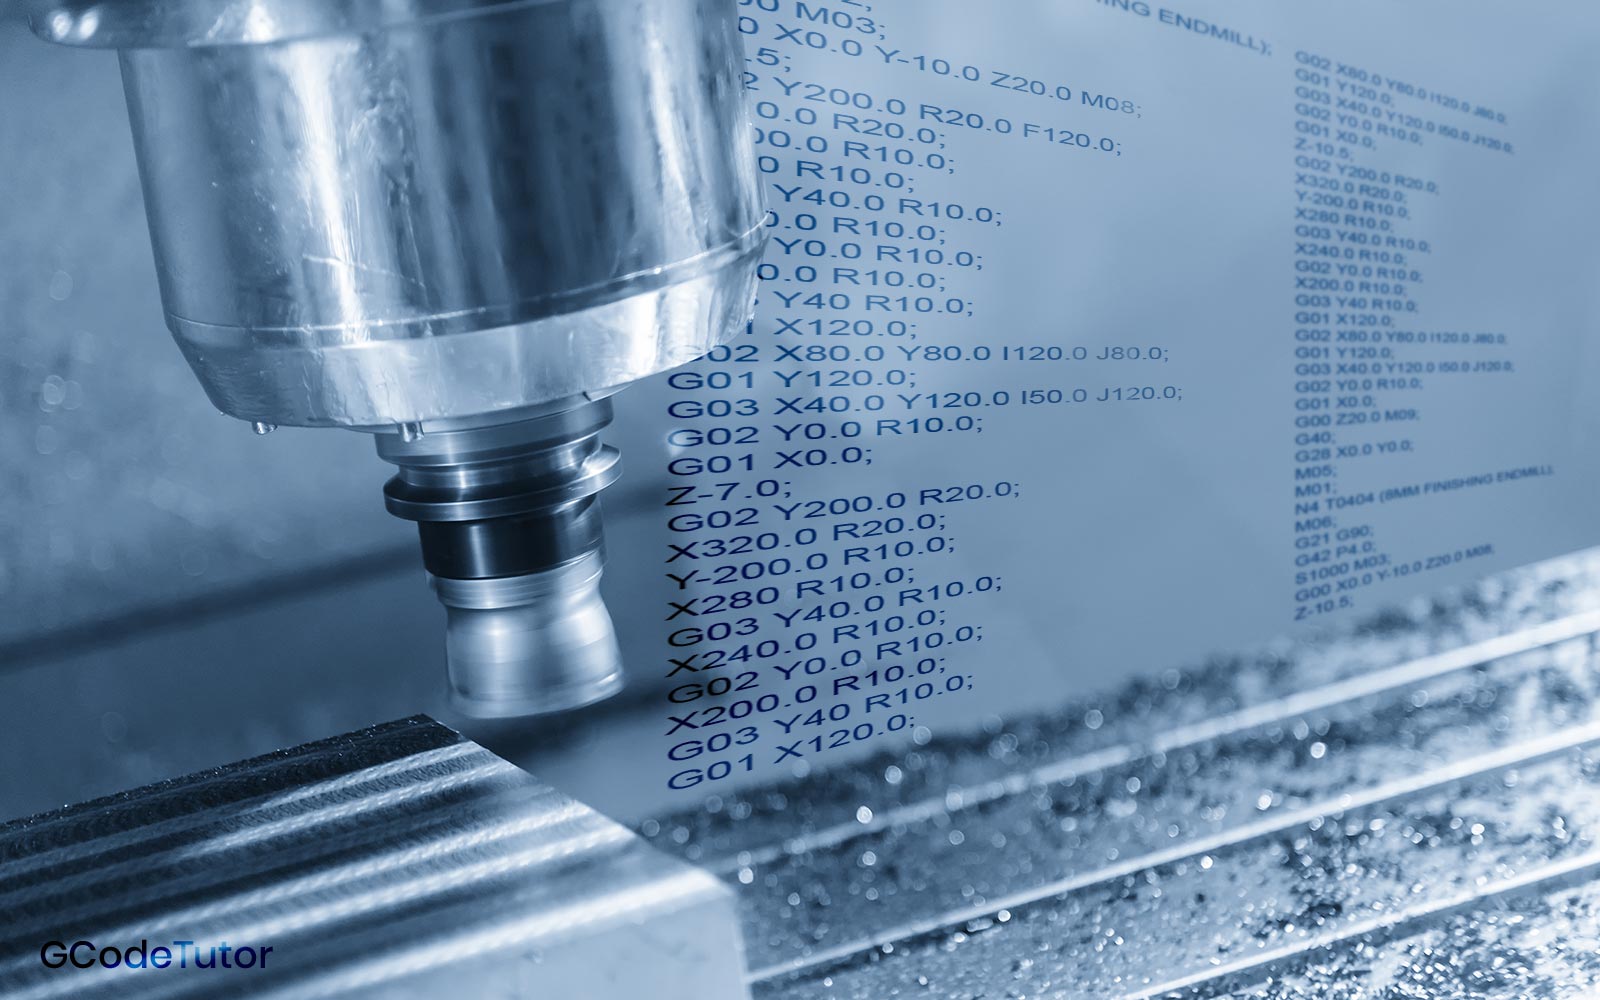 cnc-m-codes-learn-how-to-program-m-codes-on-cnc-machines